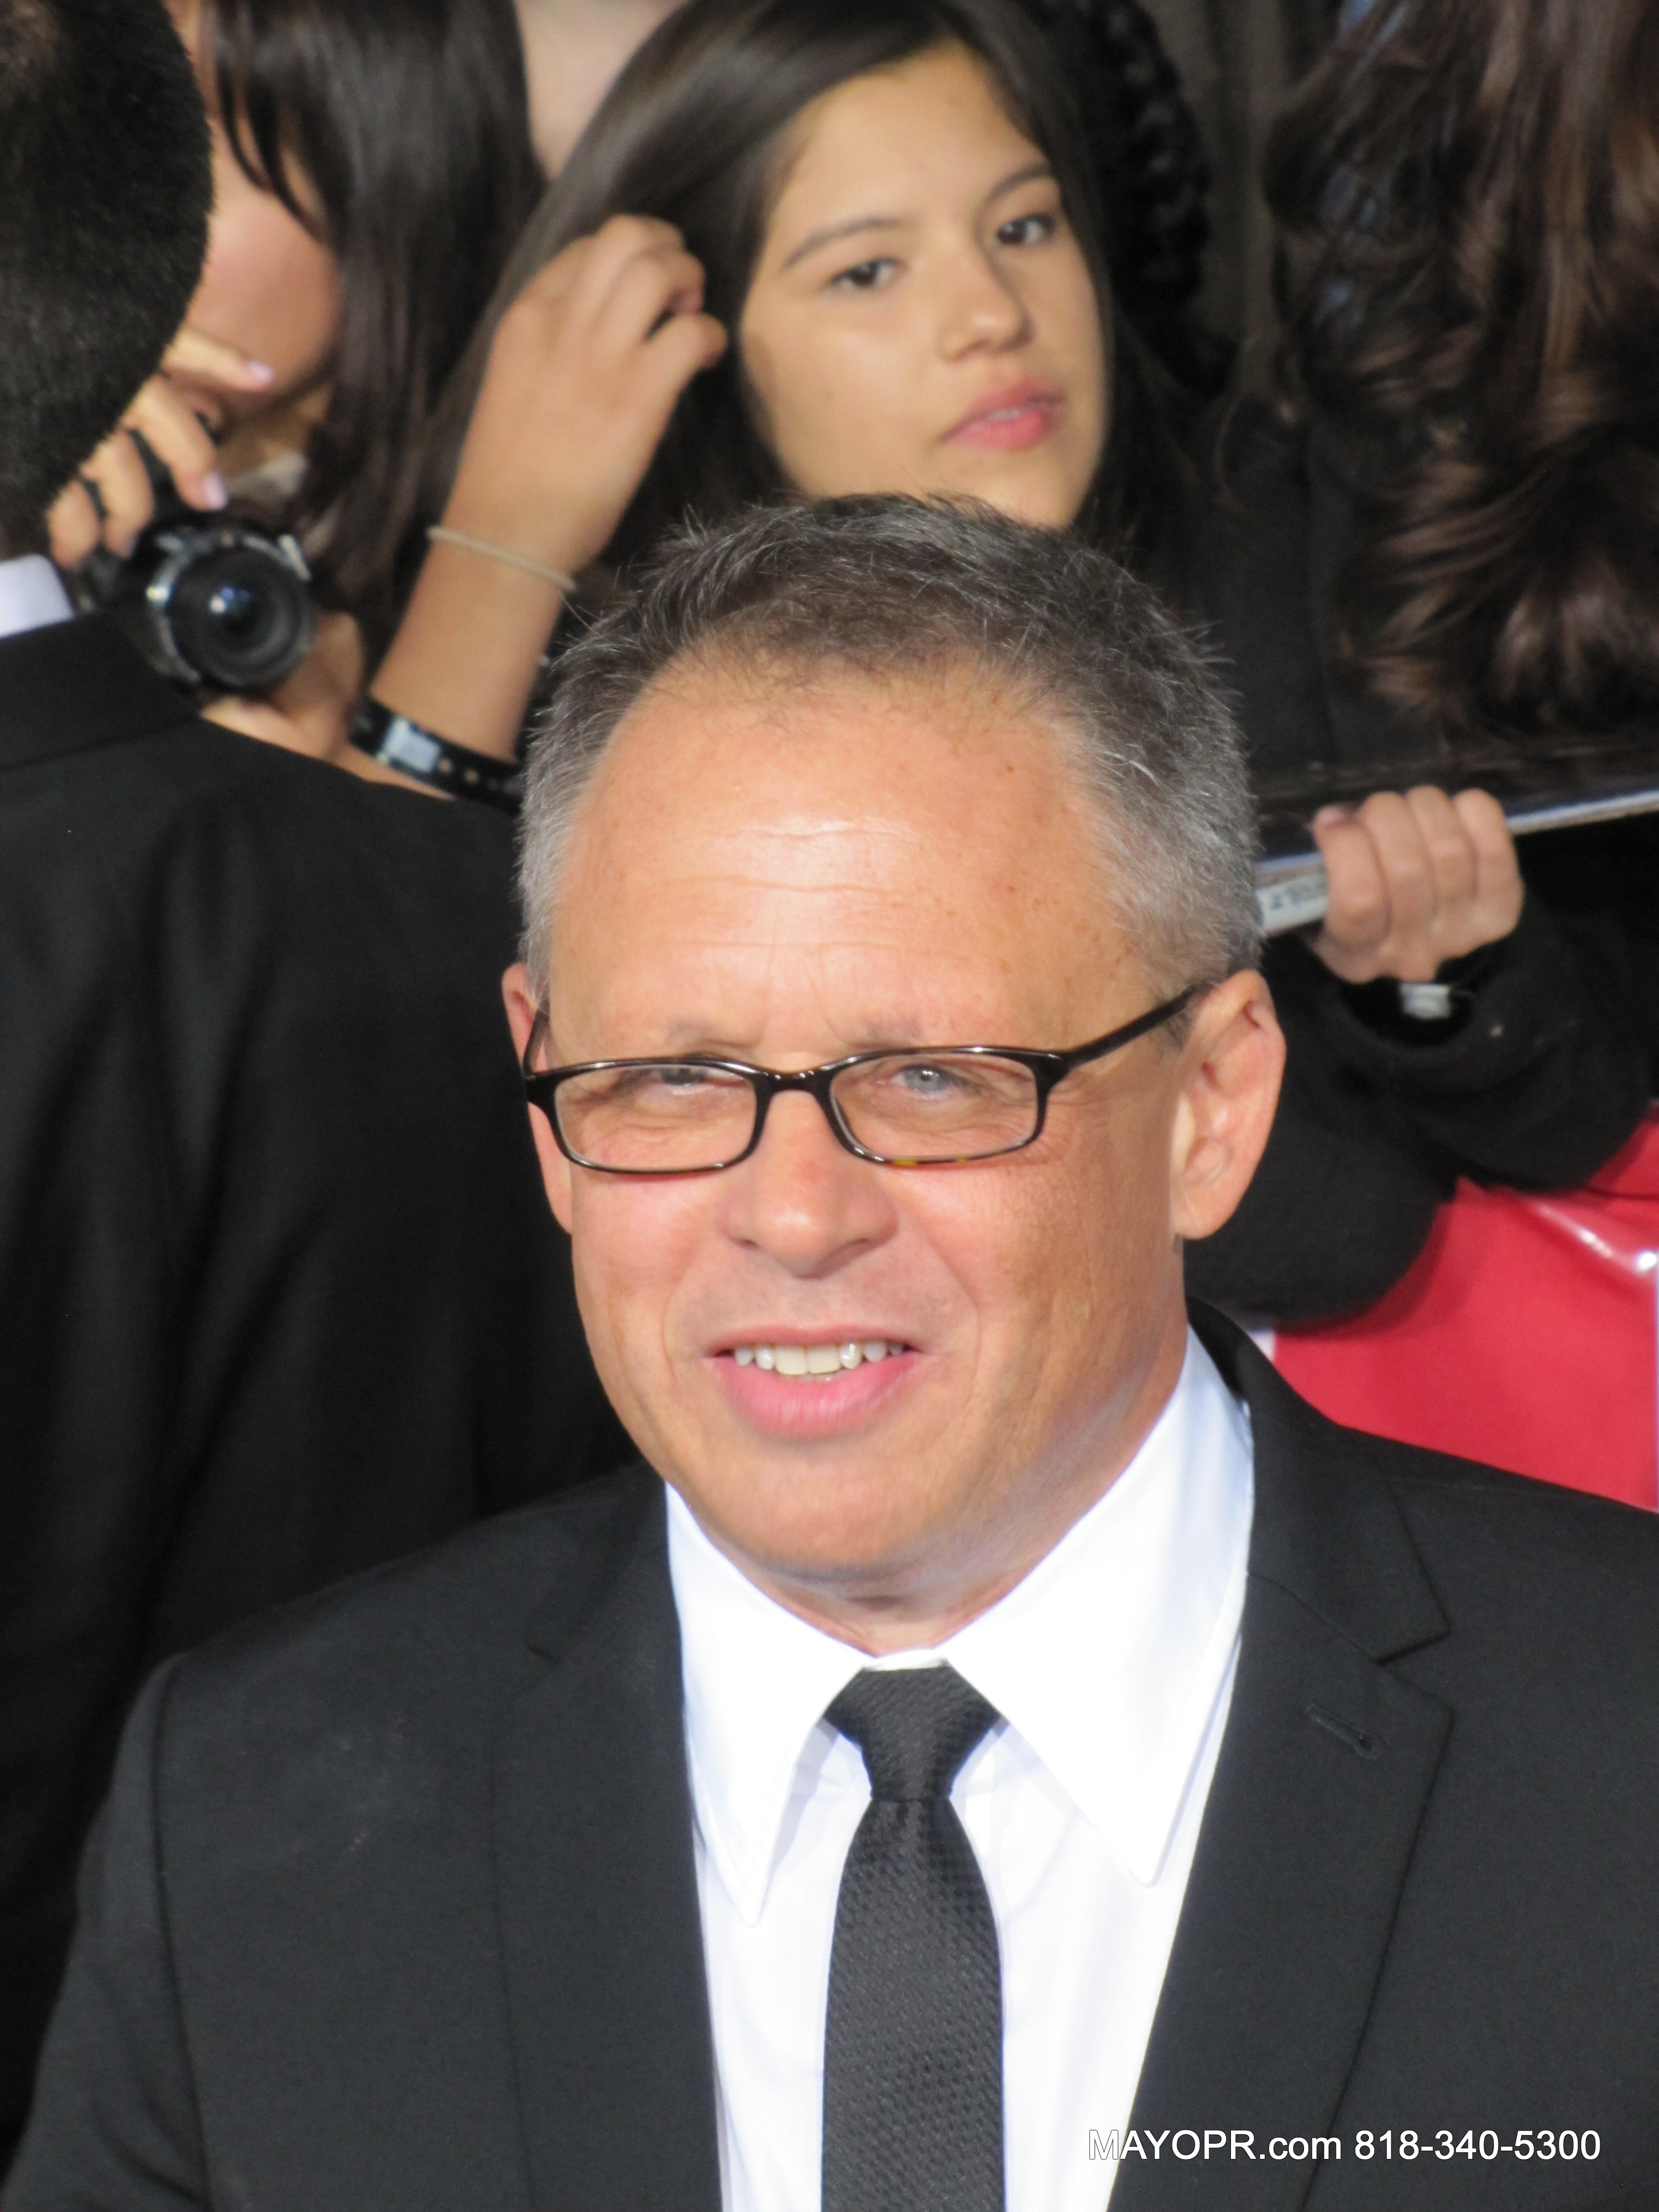 Director Bill Condon at the Premiere of The Twilight Breaking Dawn Part 2, Nokia LA Live Theater, Downtown Los Angeles, CA.